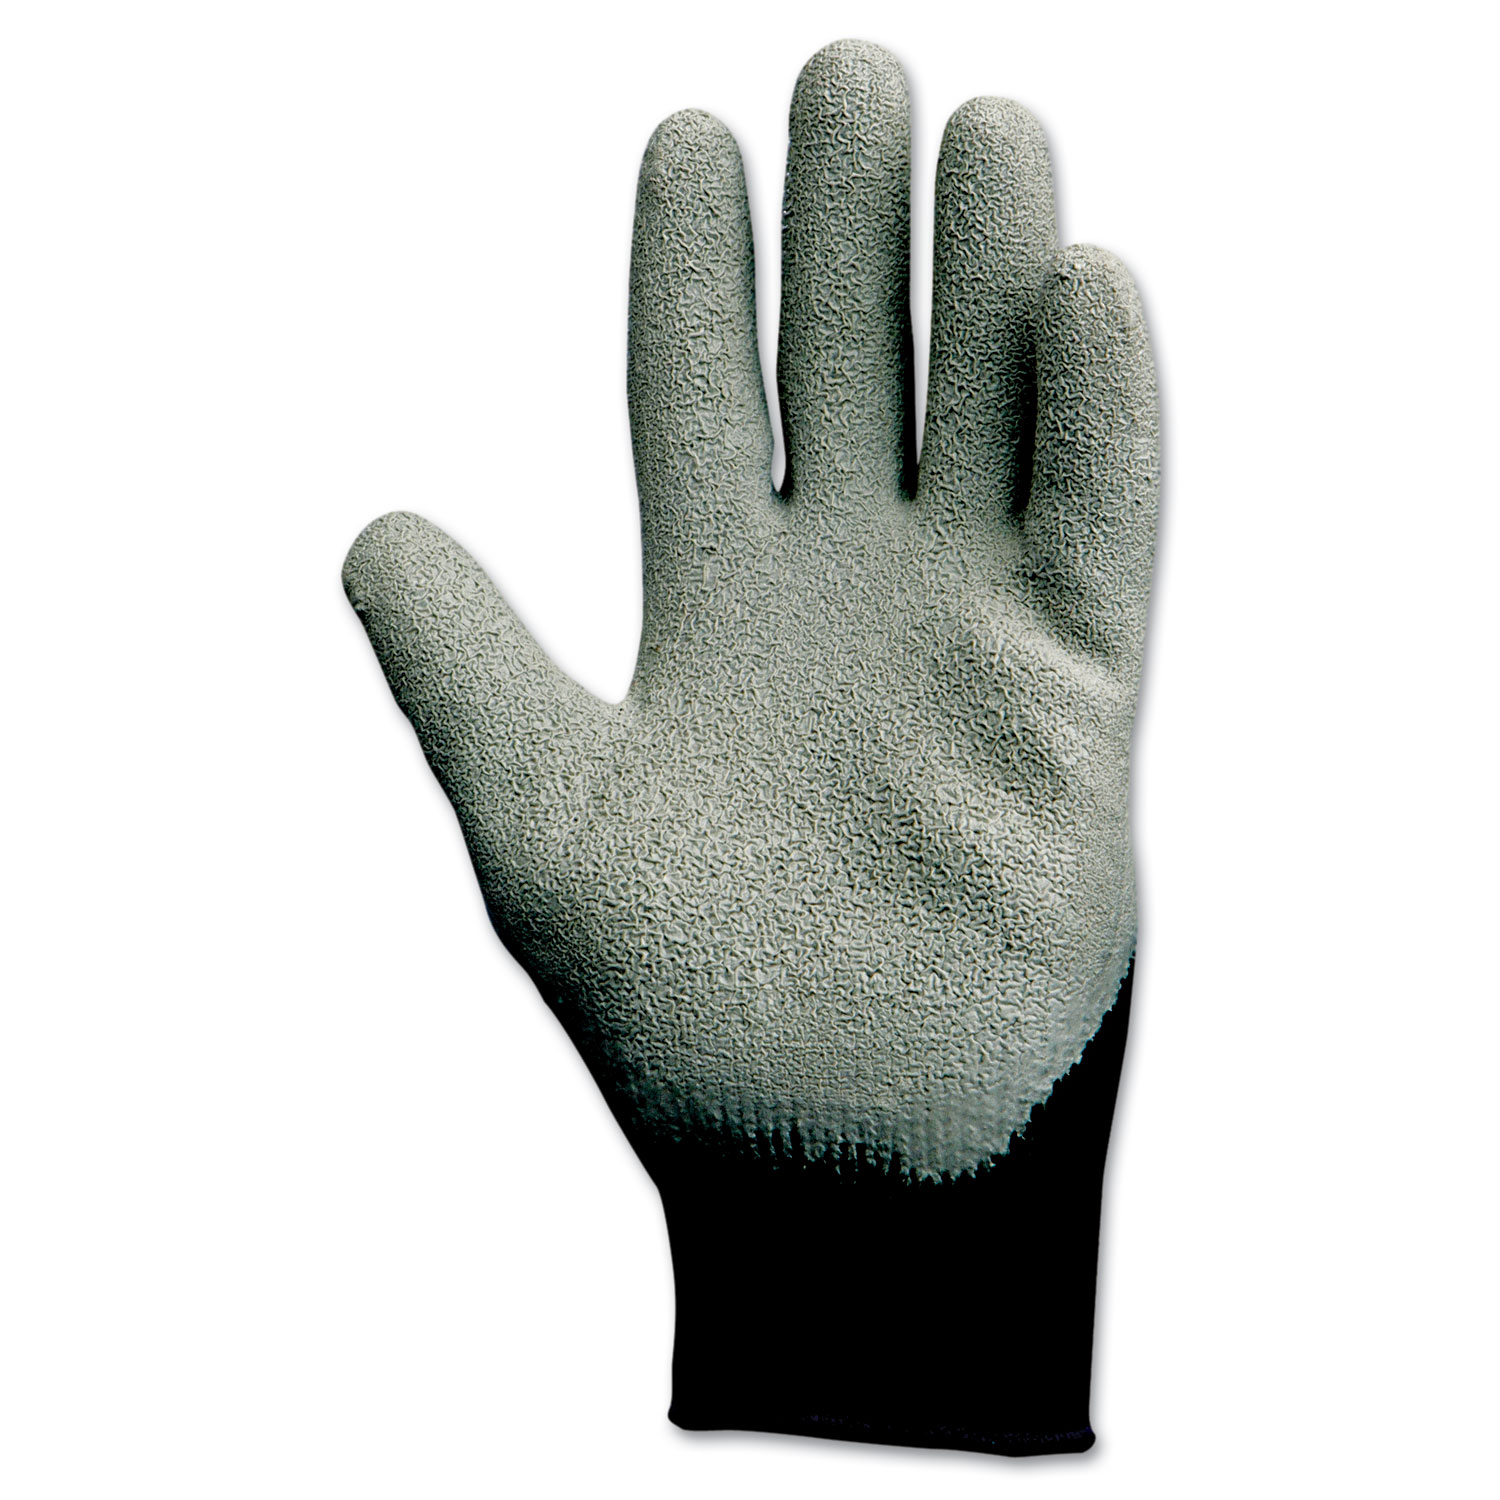 G40 Latex Coated Poly-Cotton Gloves, 250 mm Length, Large/Size 9, Gray, 12 Pairs